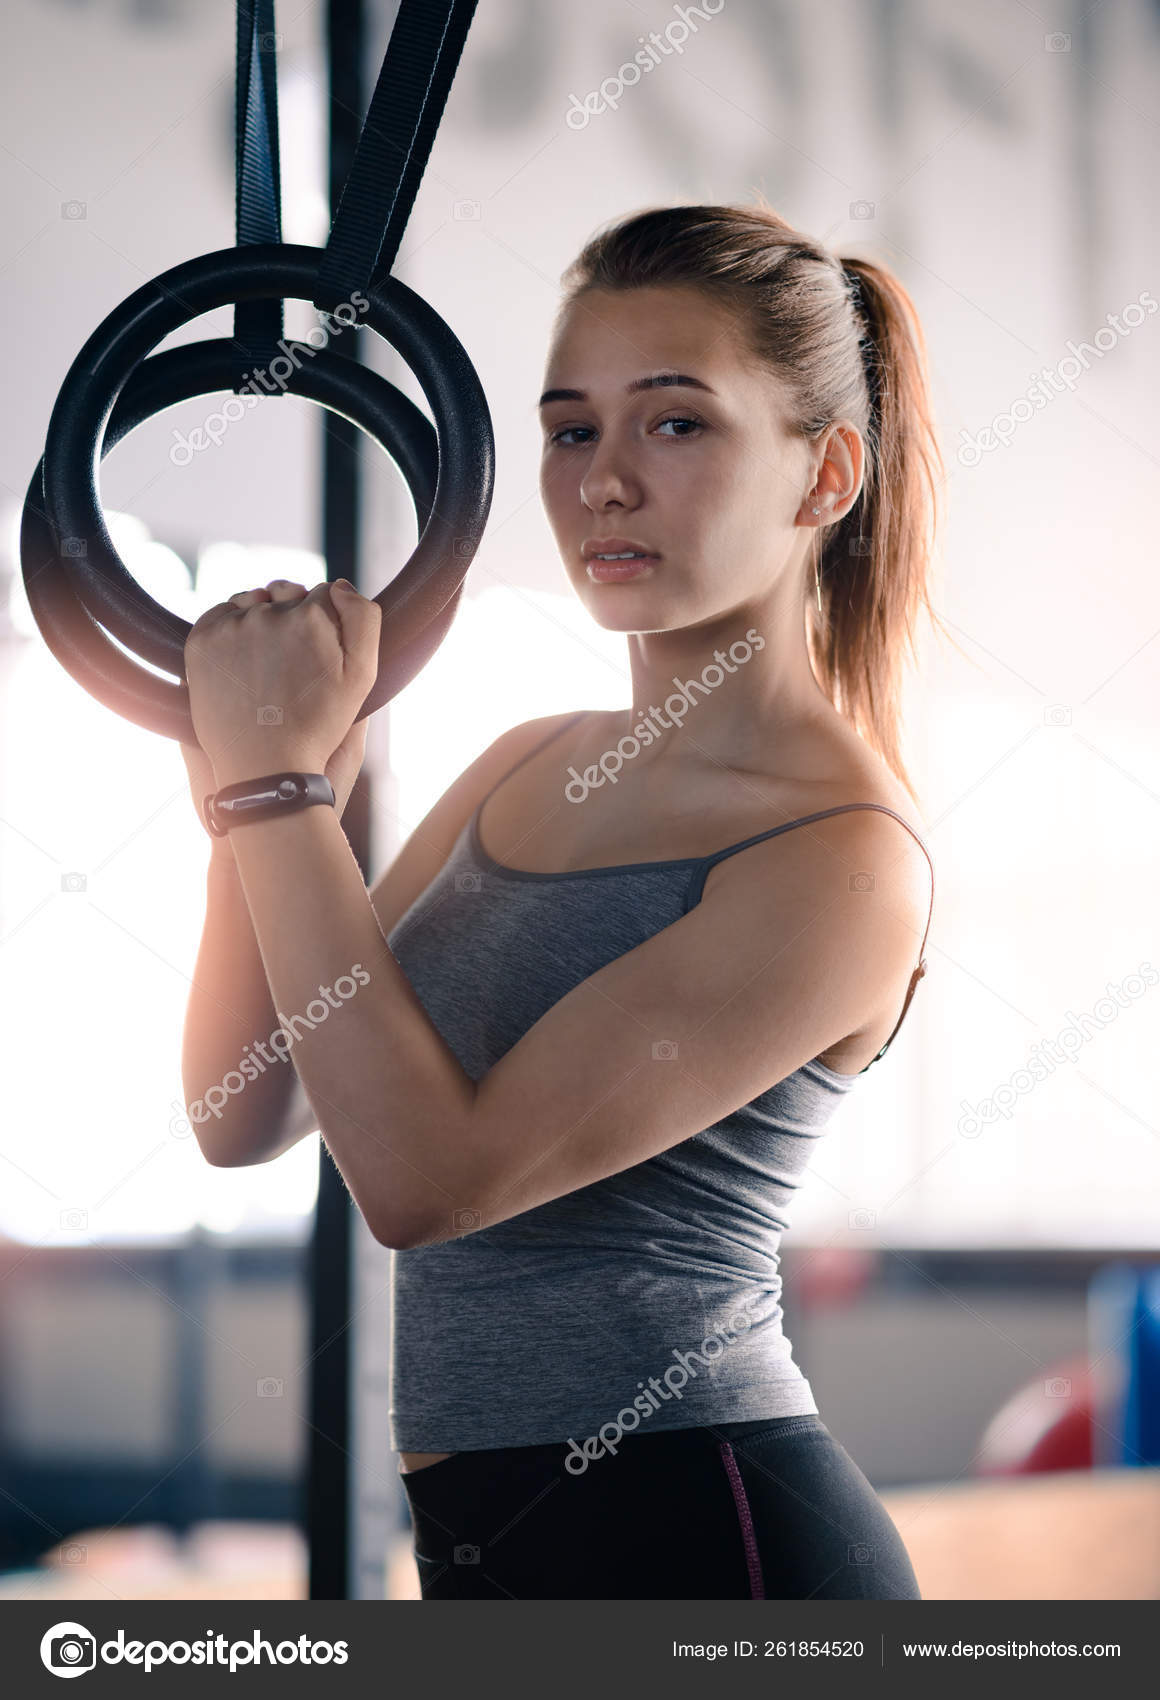 Woman using gymnastic rings in gym - Stock Photo - Dissolve